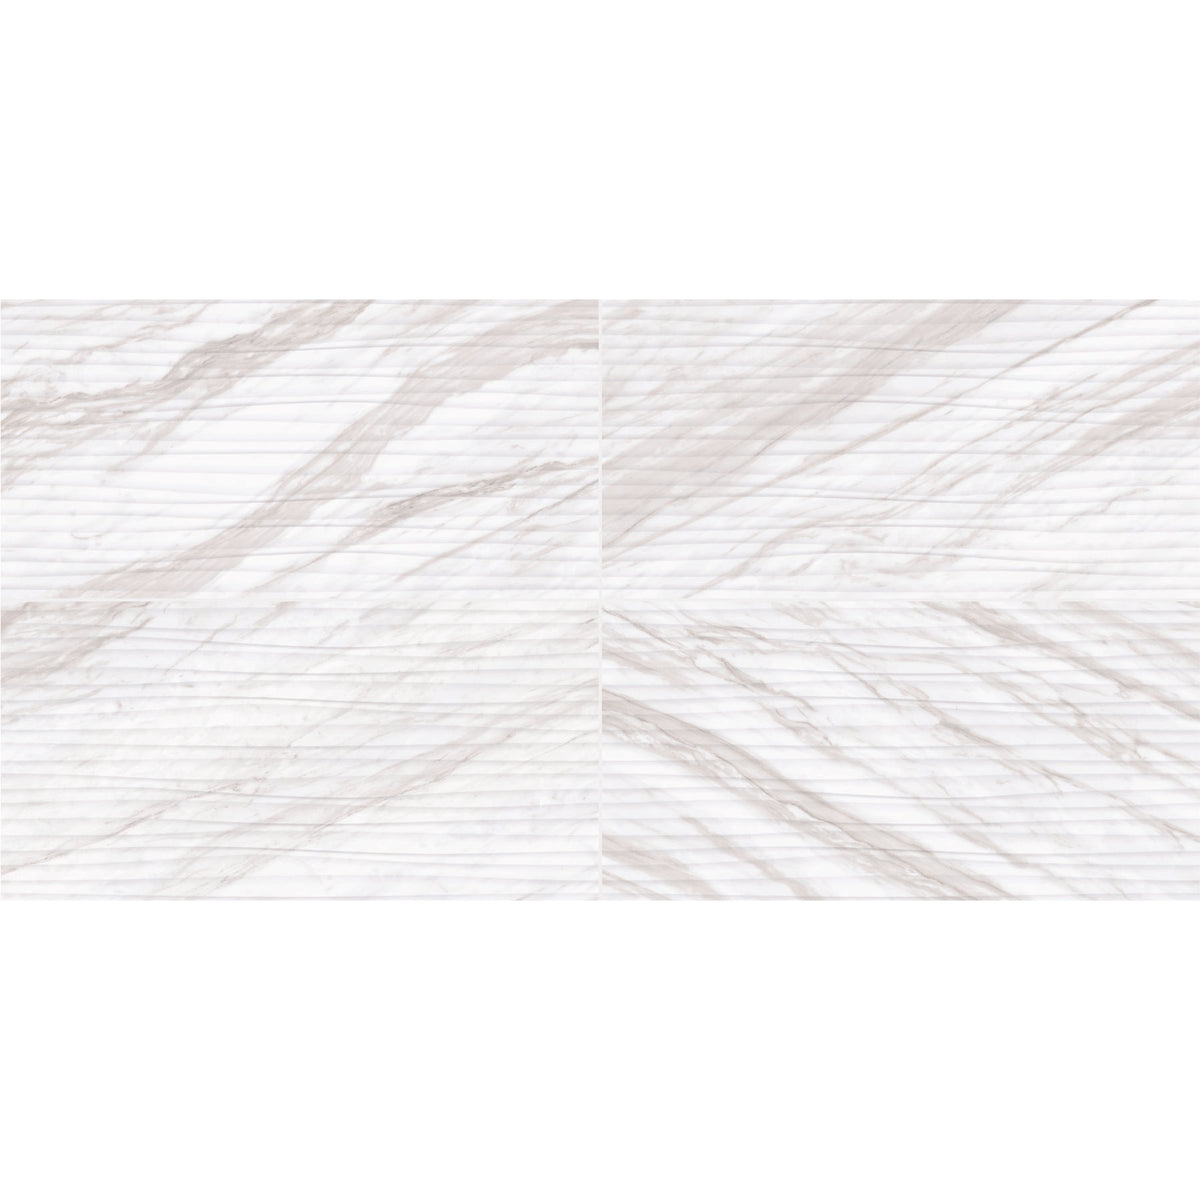 Daltile - Perpetuo - 12 in. x 24 in. Glazed Ceramic Wave Wall Tile - Timeless White Variation